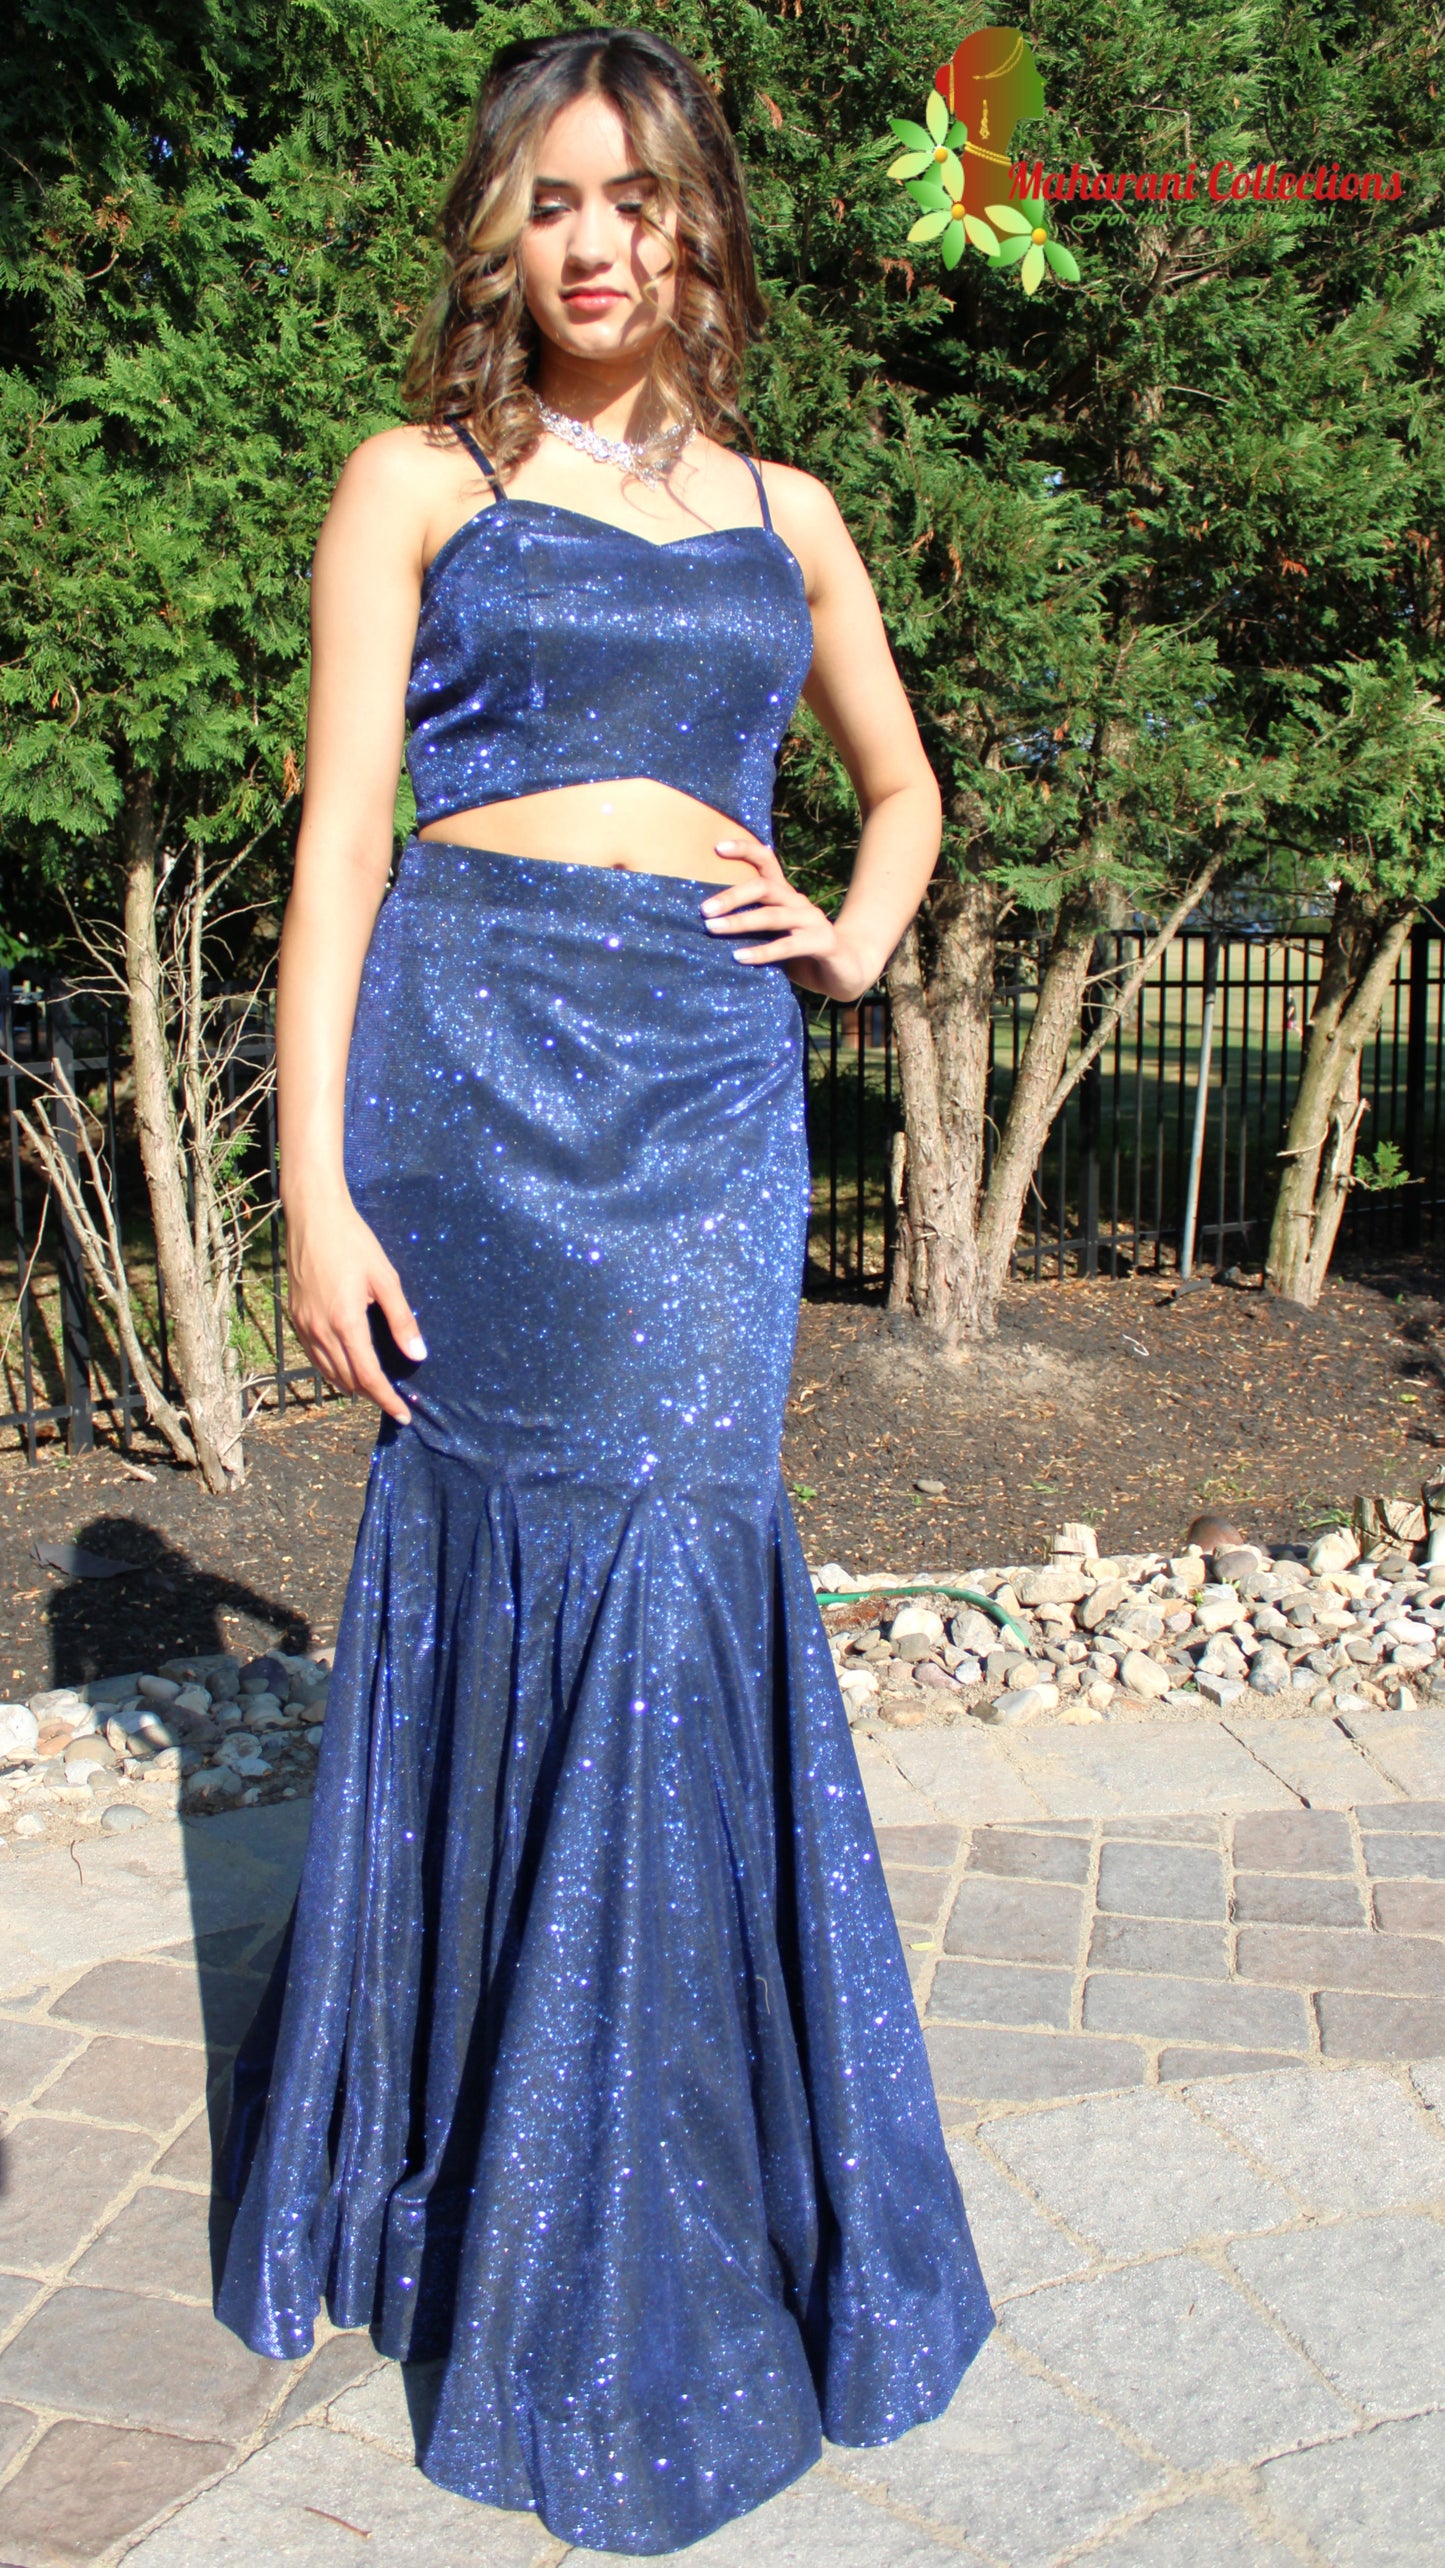 Maharani's Designer Mermaid Gala Gown - Navy Blue (M) with Glitter and Sequins Work